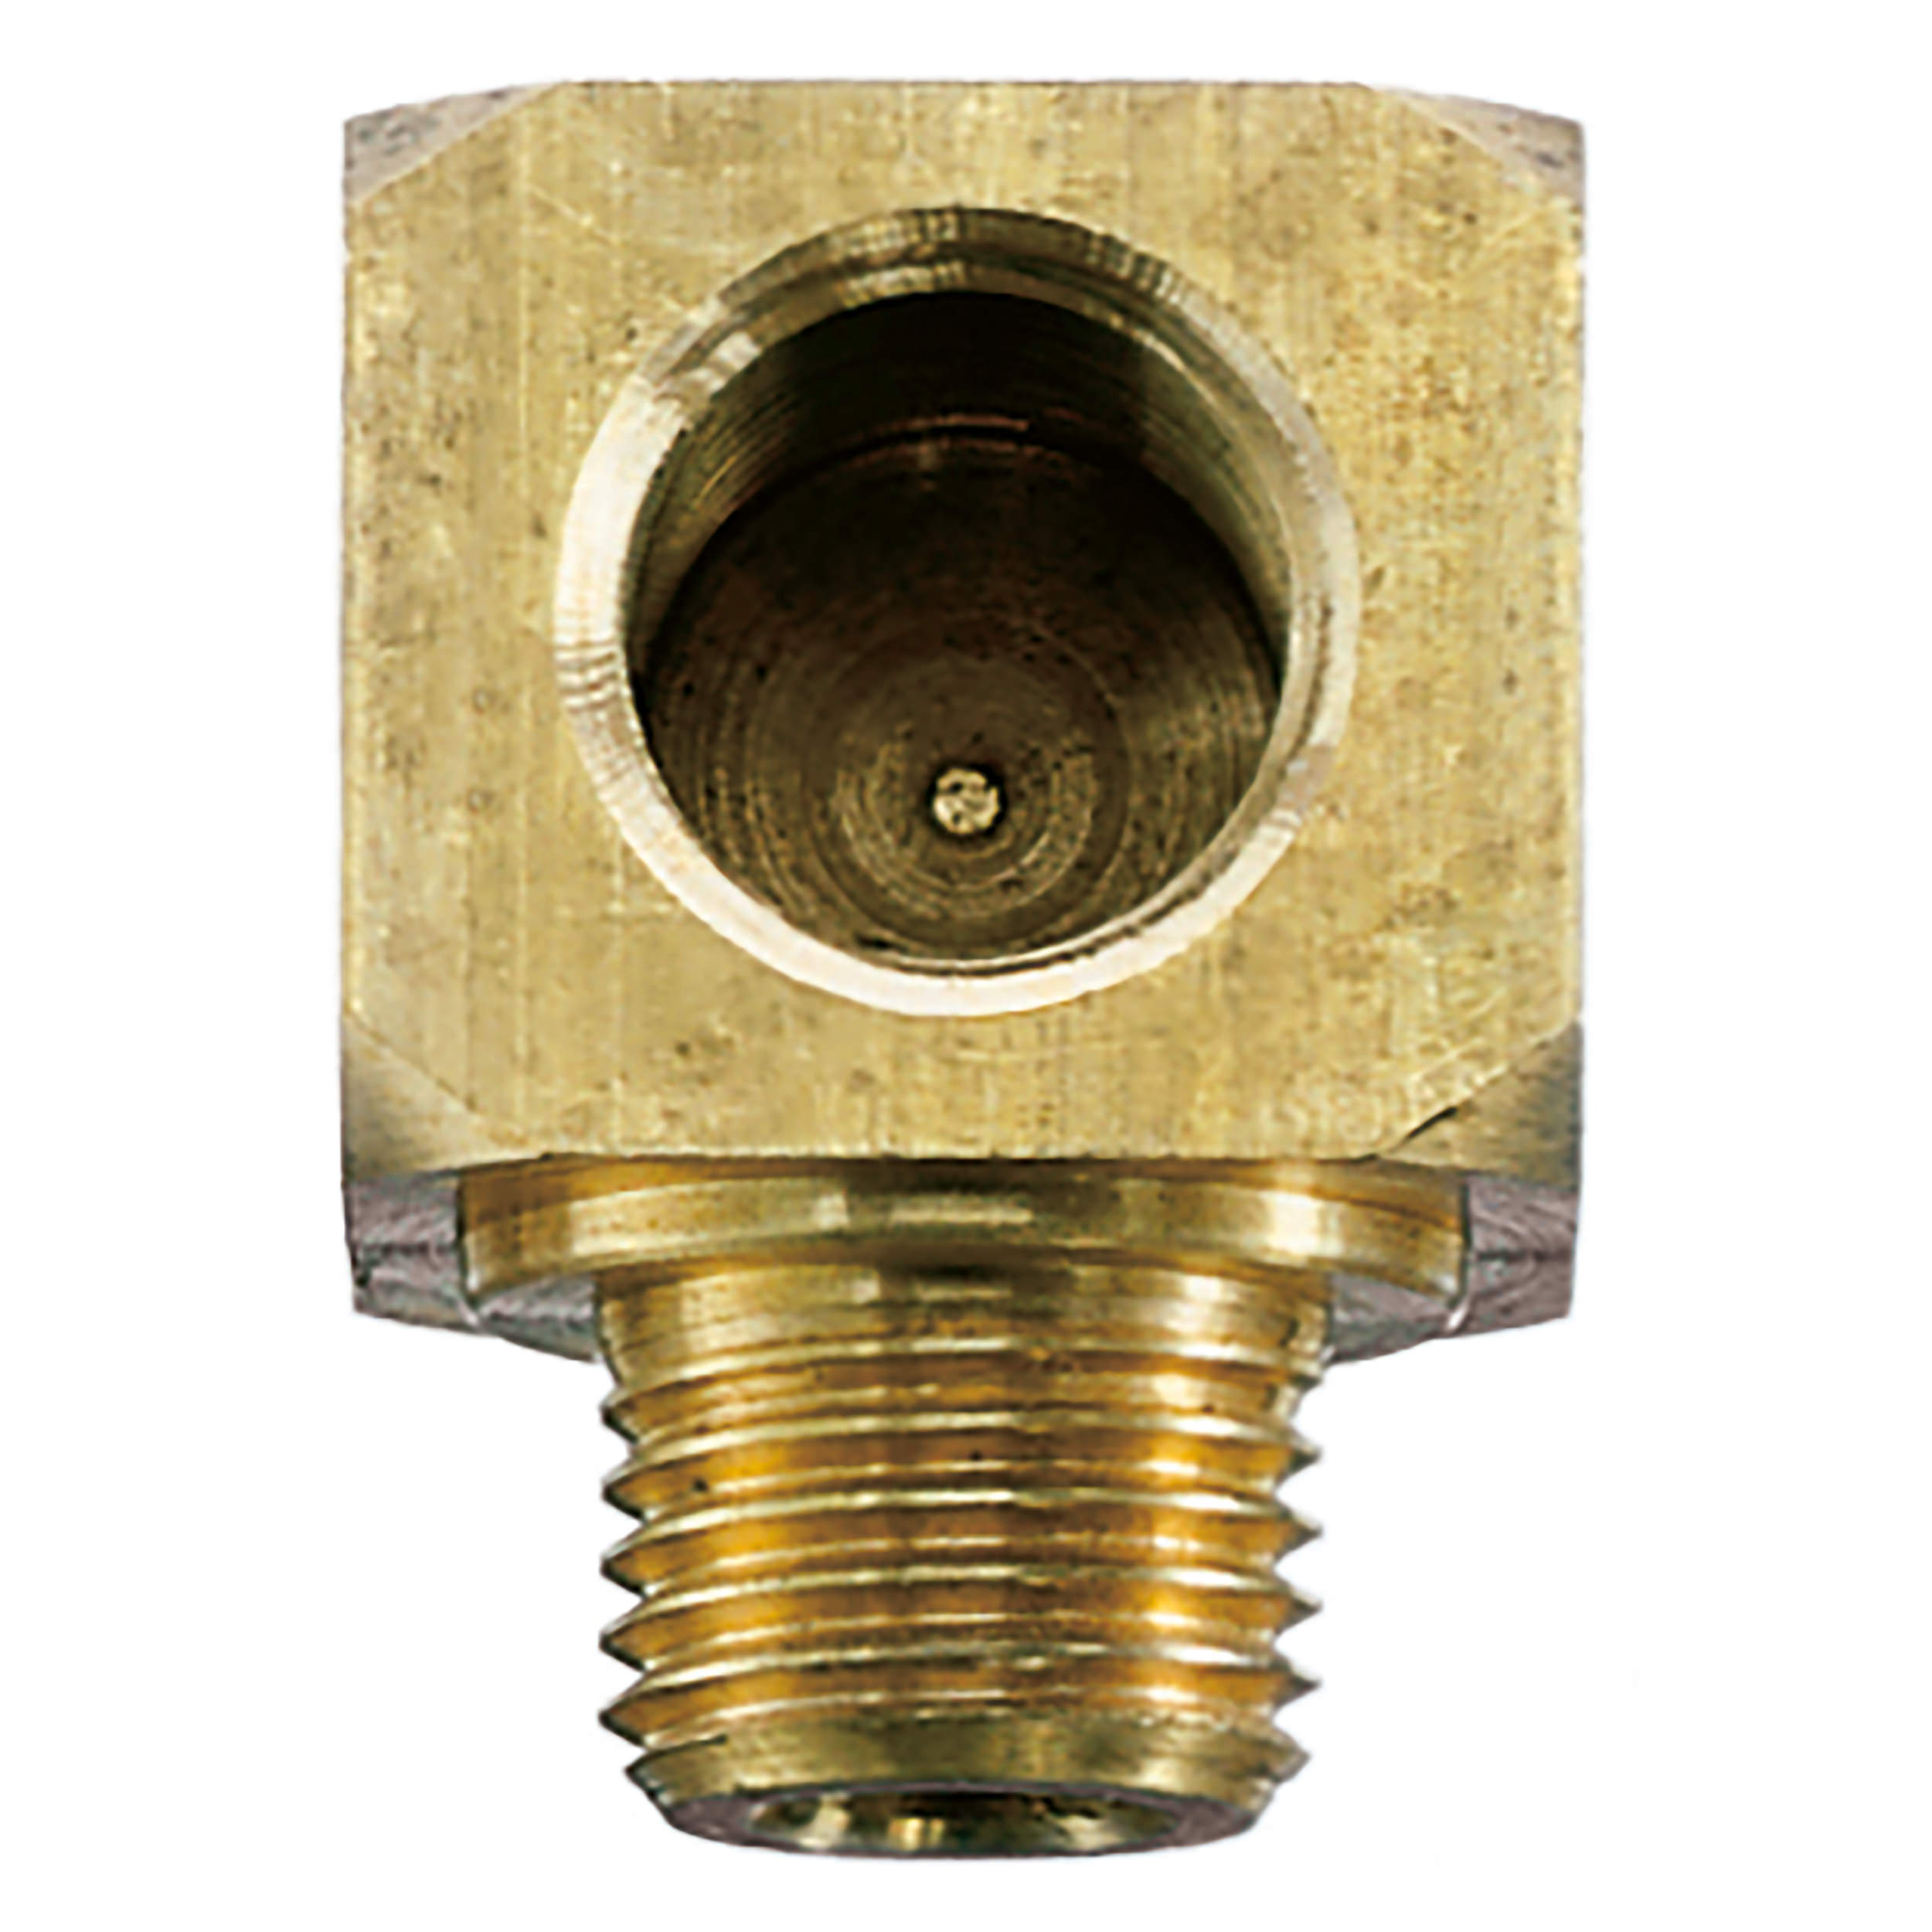 Screw-in distributor L, connection: G⅛, length: 22 mm, H: 22 mm, AF 14 mm, max. operating pressure 580 psi, brass, nickel-plated